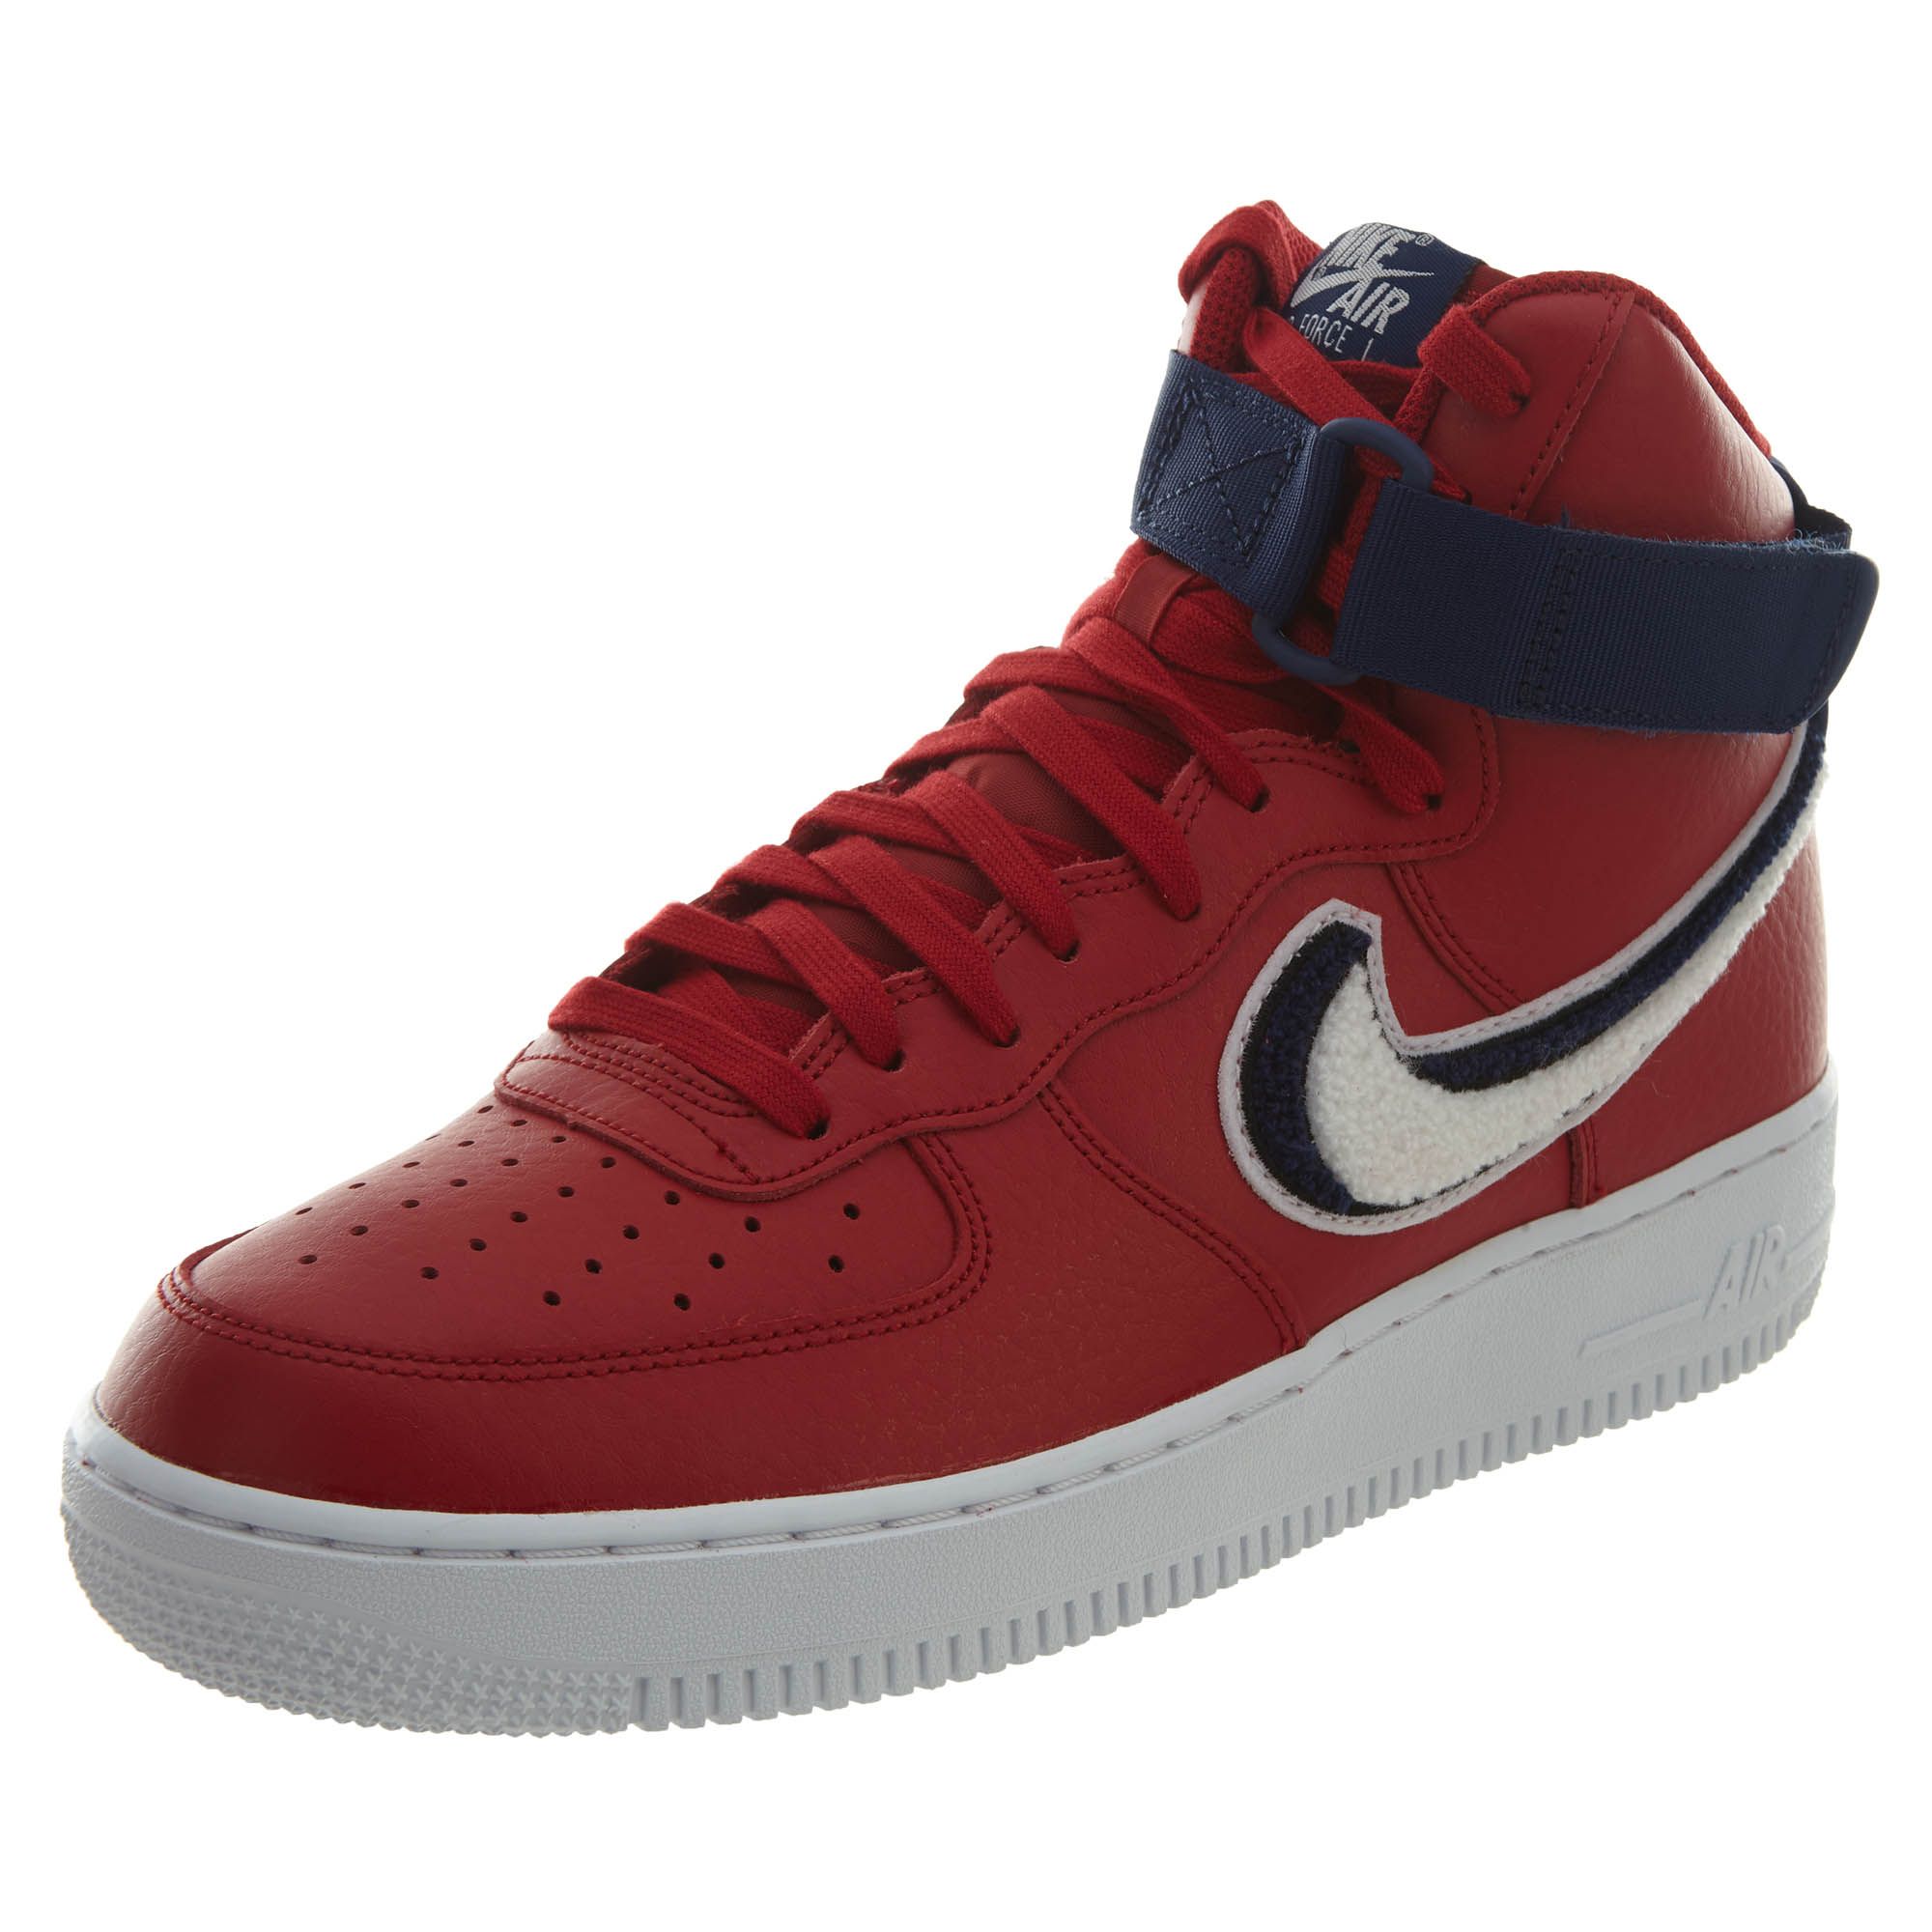 red air forces high top